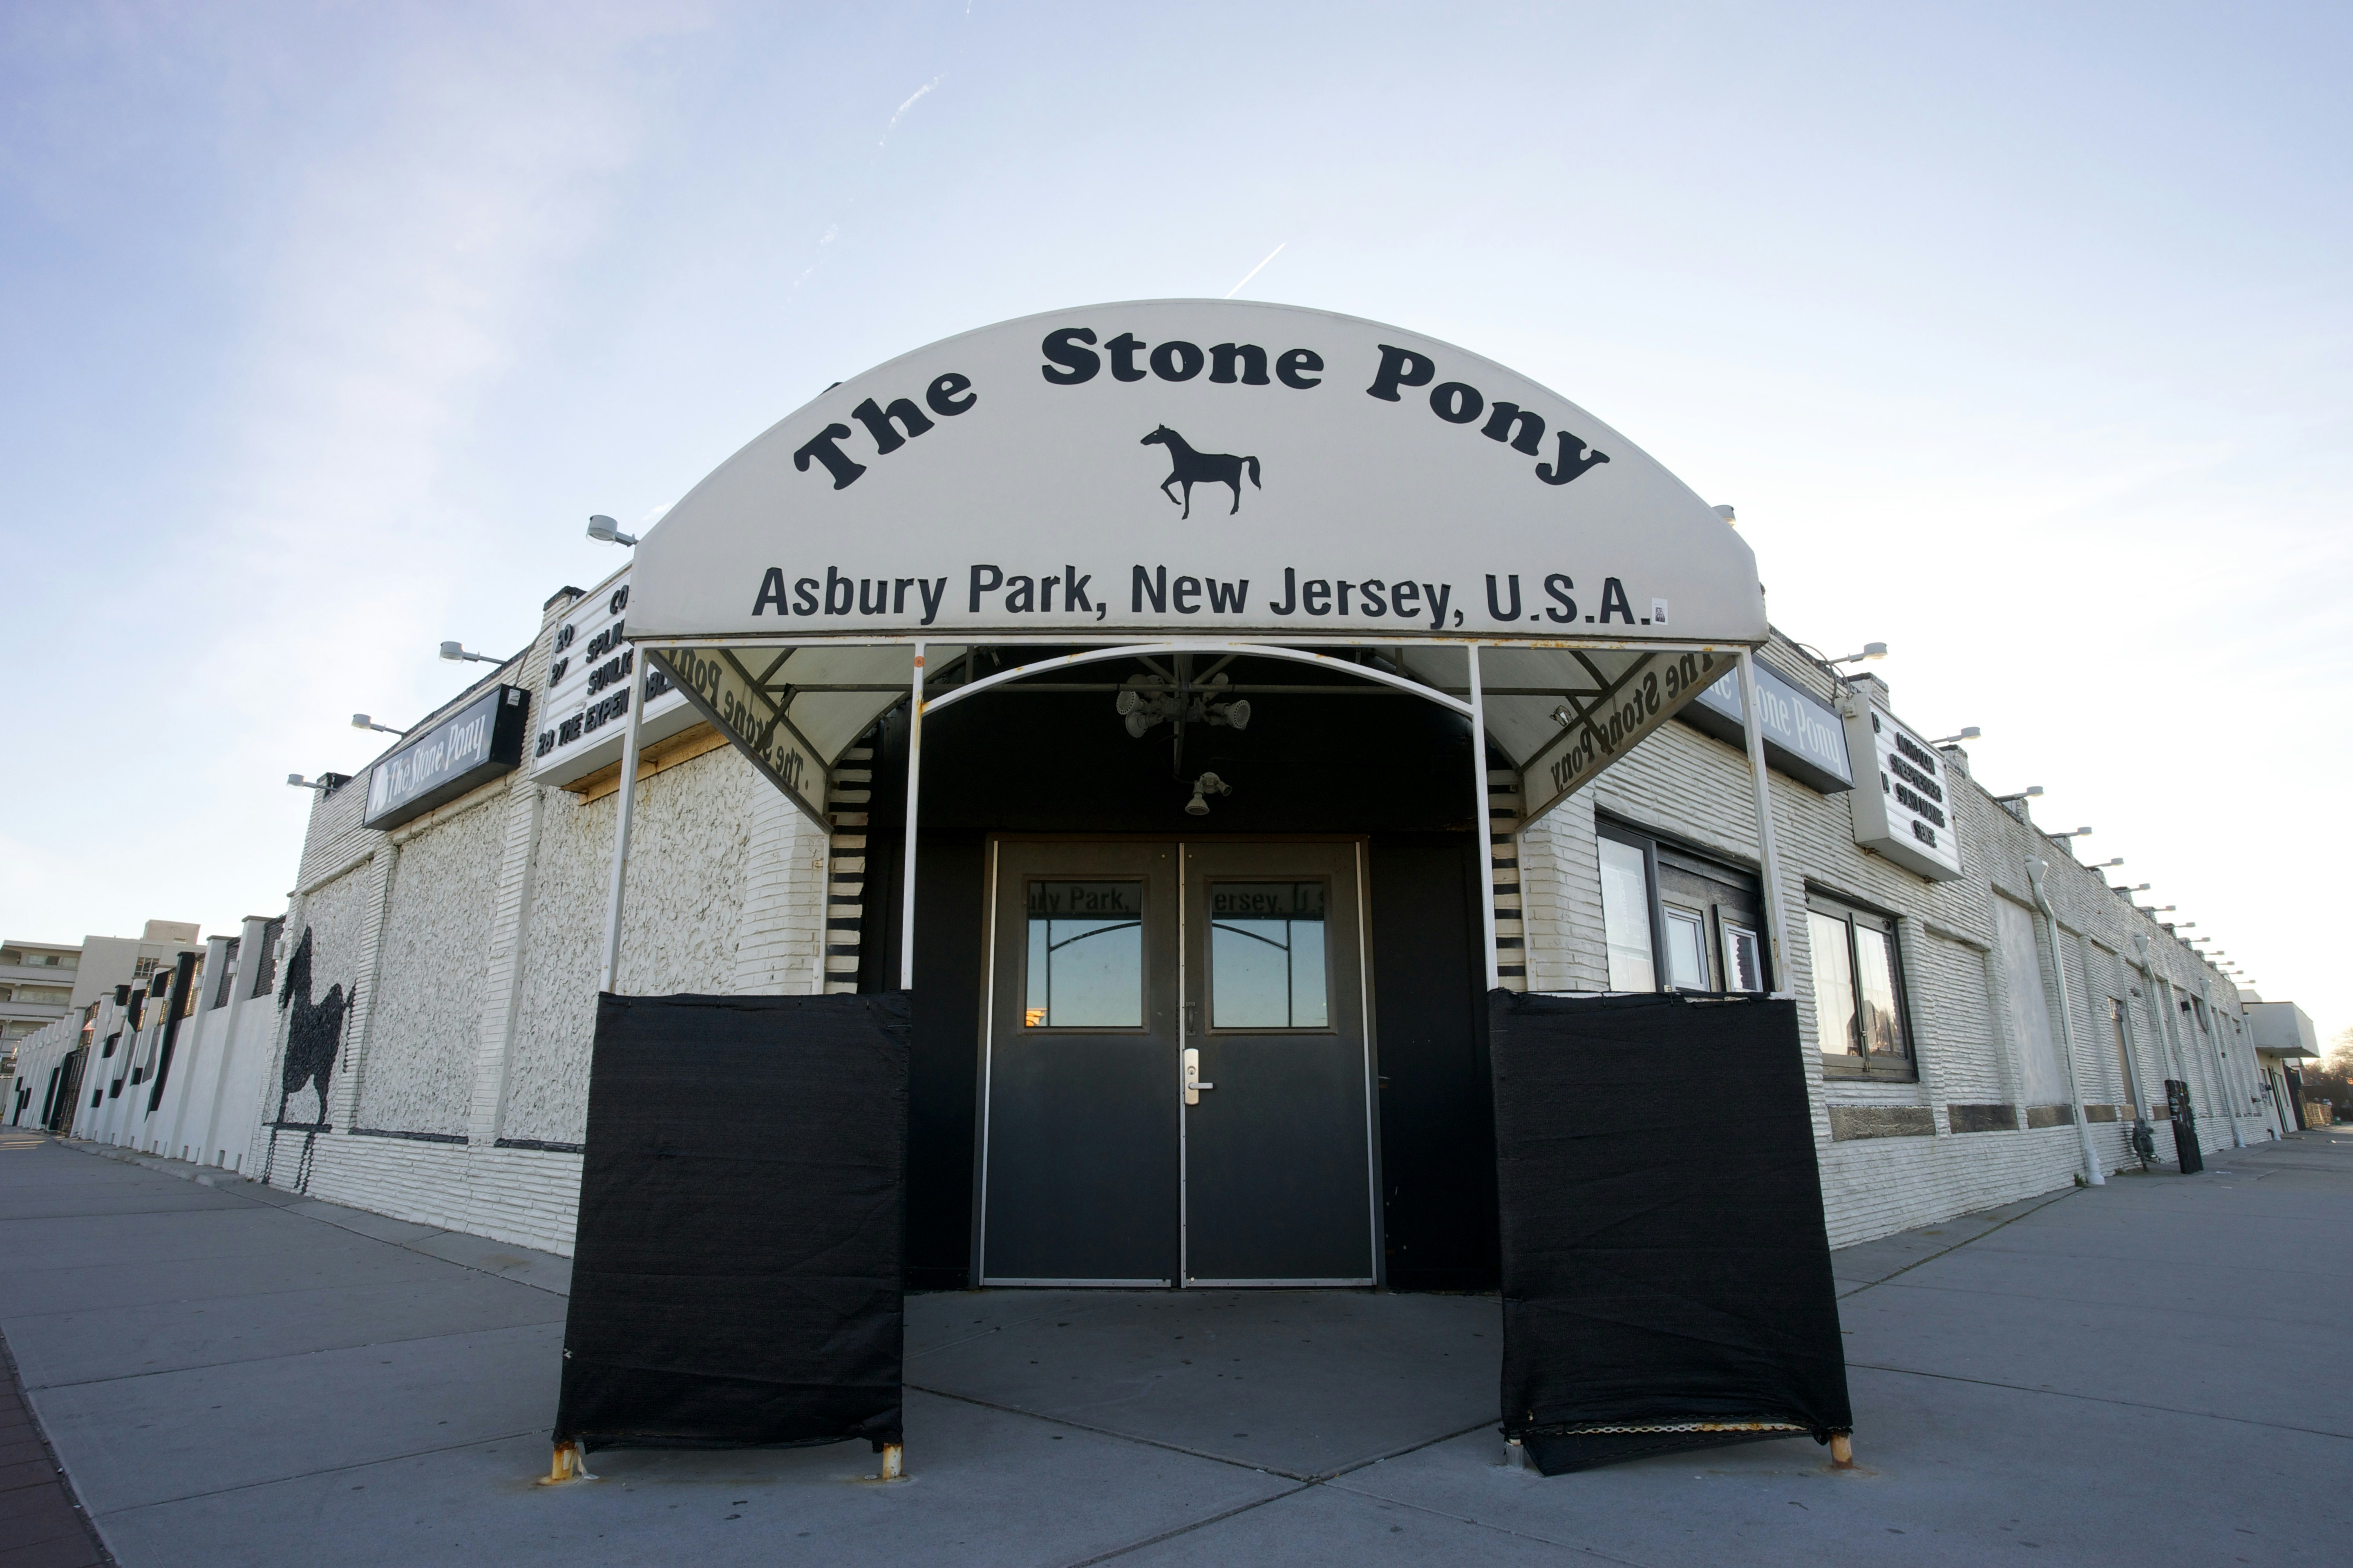 Exterior view of the infamous music venue the Stone Pony in Asbury Park New Jersey.jpg